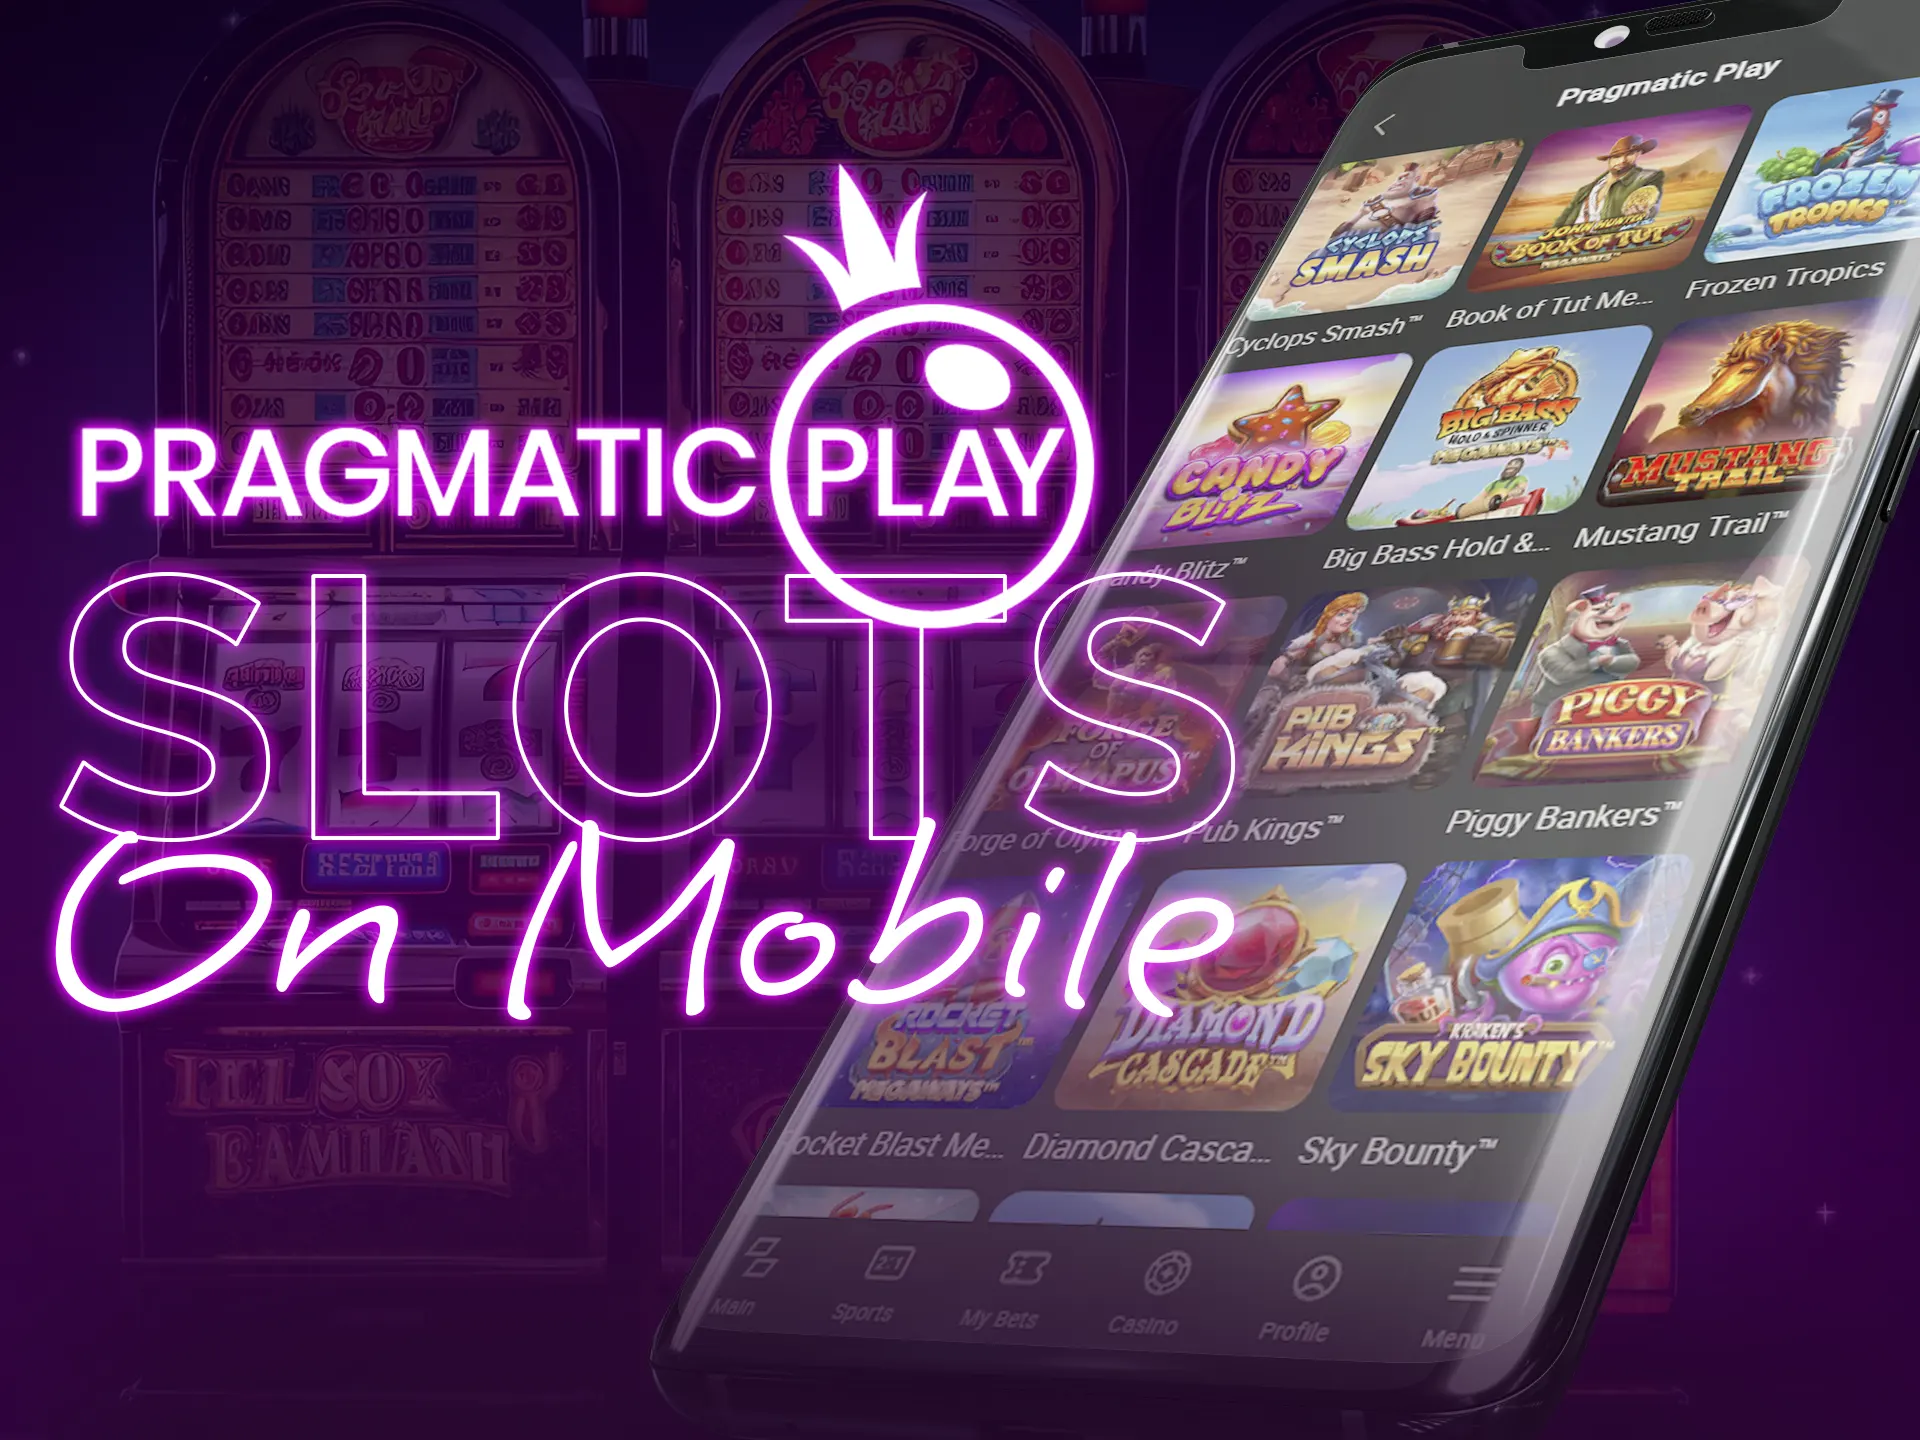 Pragmatic Play has optimized slots and casino games for mobile devices.